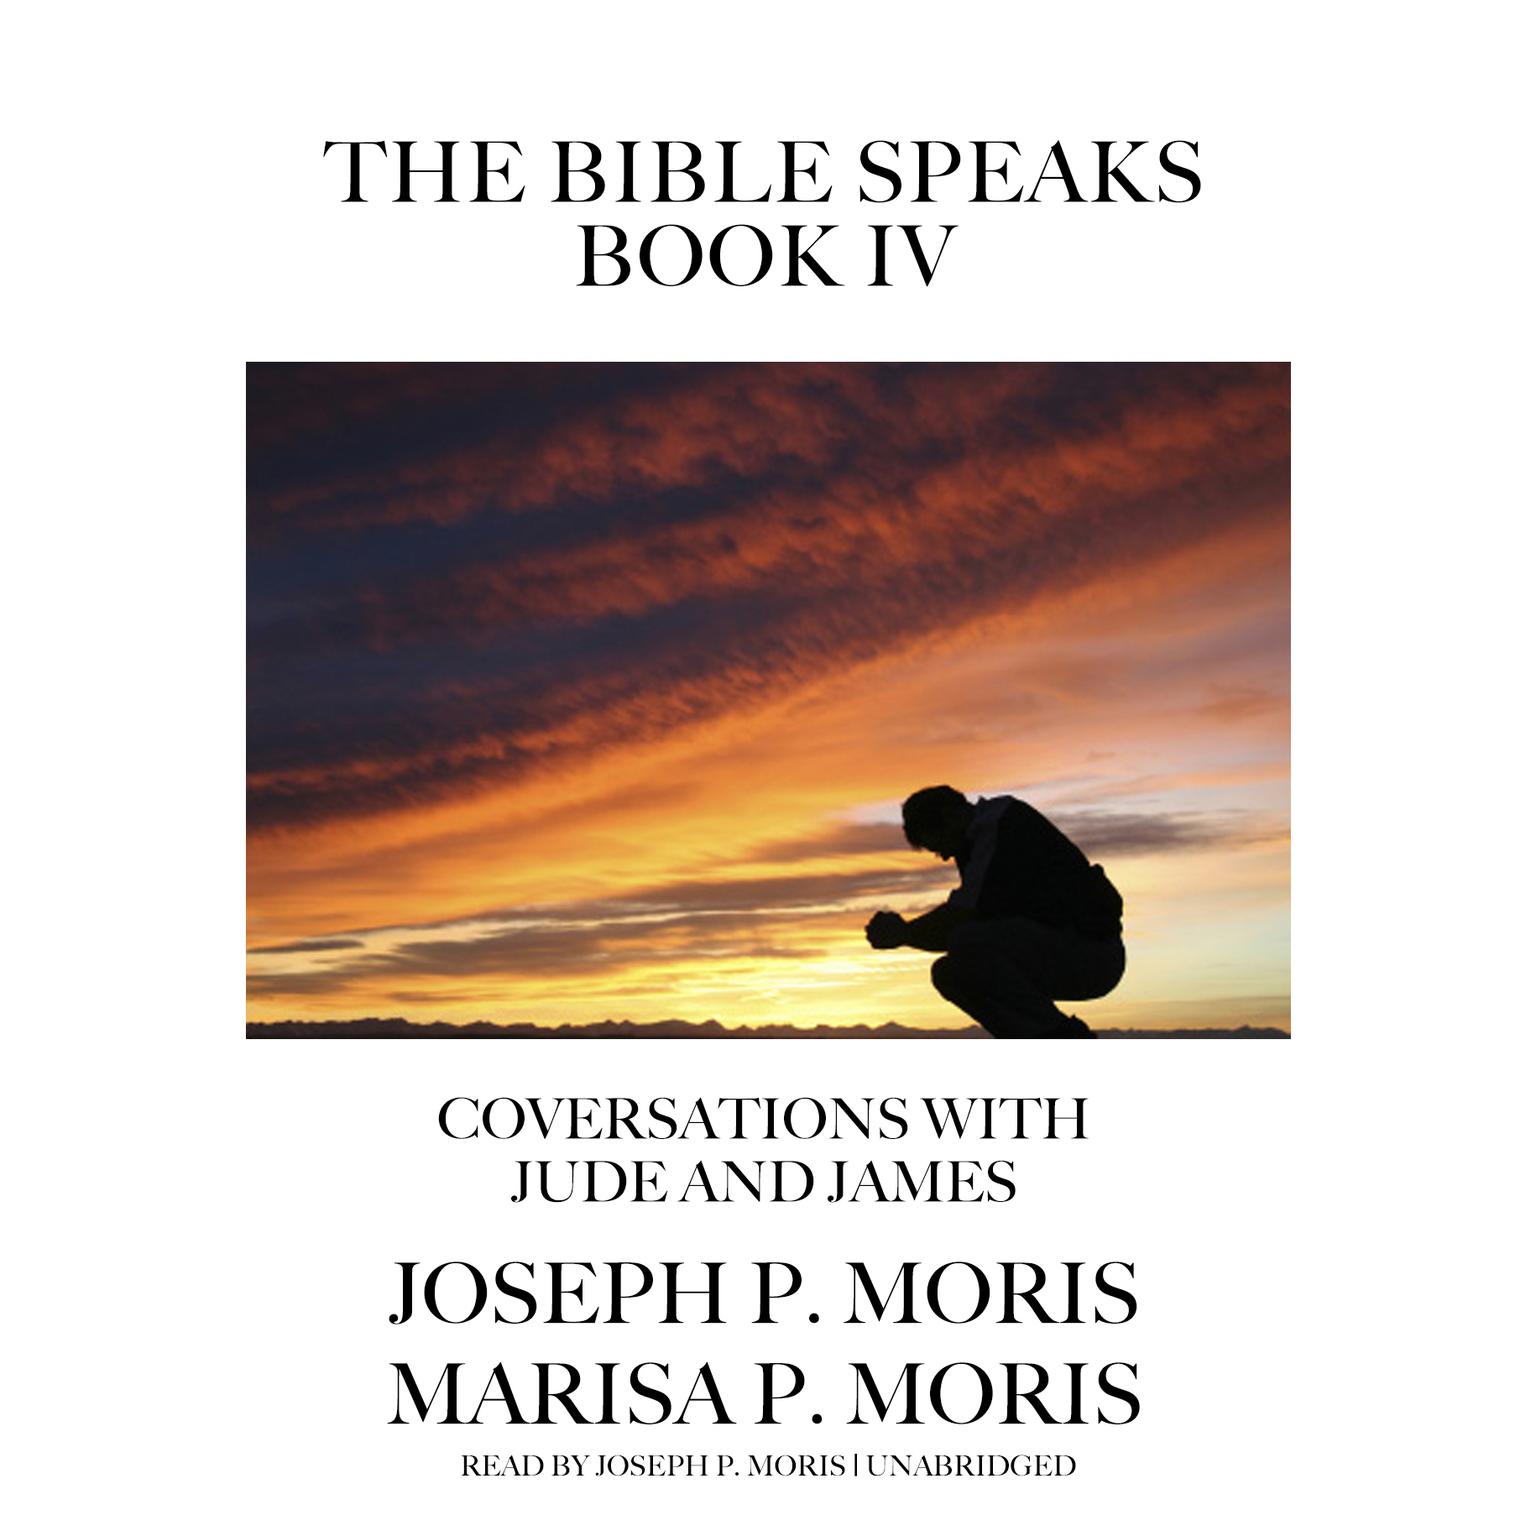 The Bible Speaks, Book IV: Conversations with Jude and James Audiobook, by Joseph P. Moris